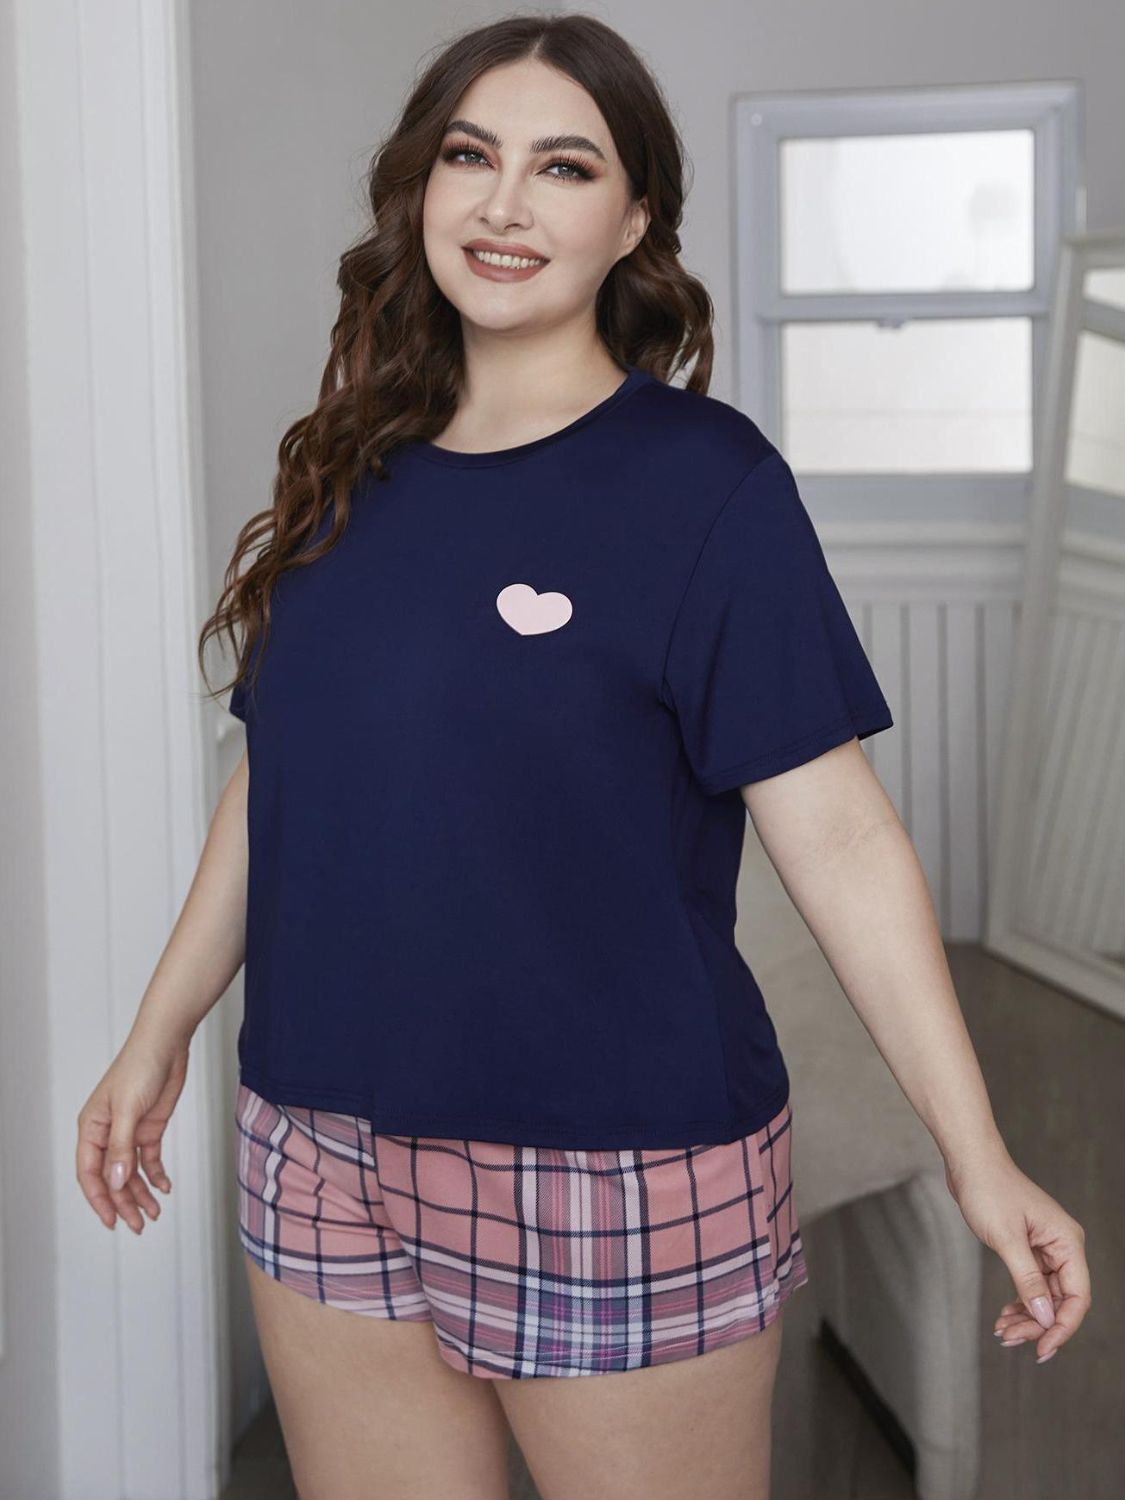 Plus Size Heart Graphic Top and Plaid Shorts Loungewear Set - Ryzela